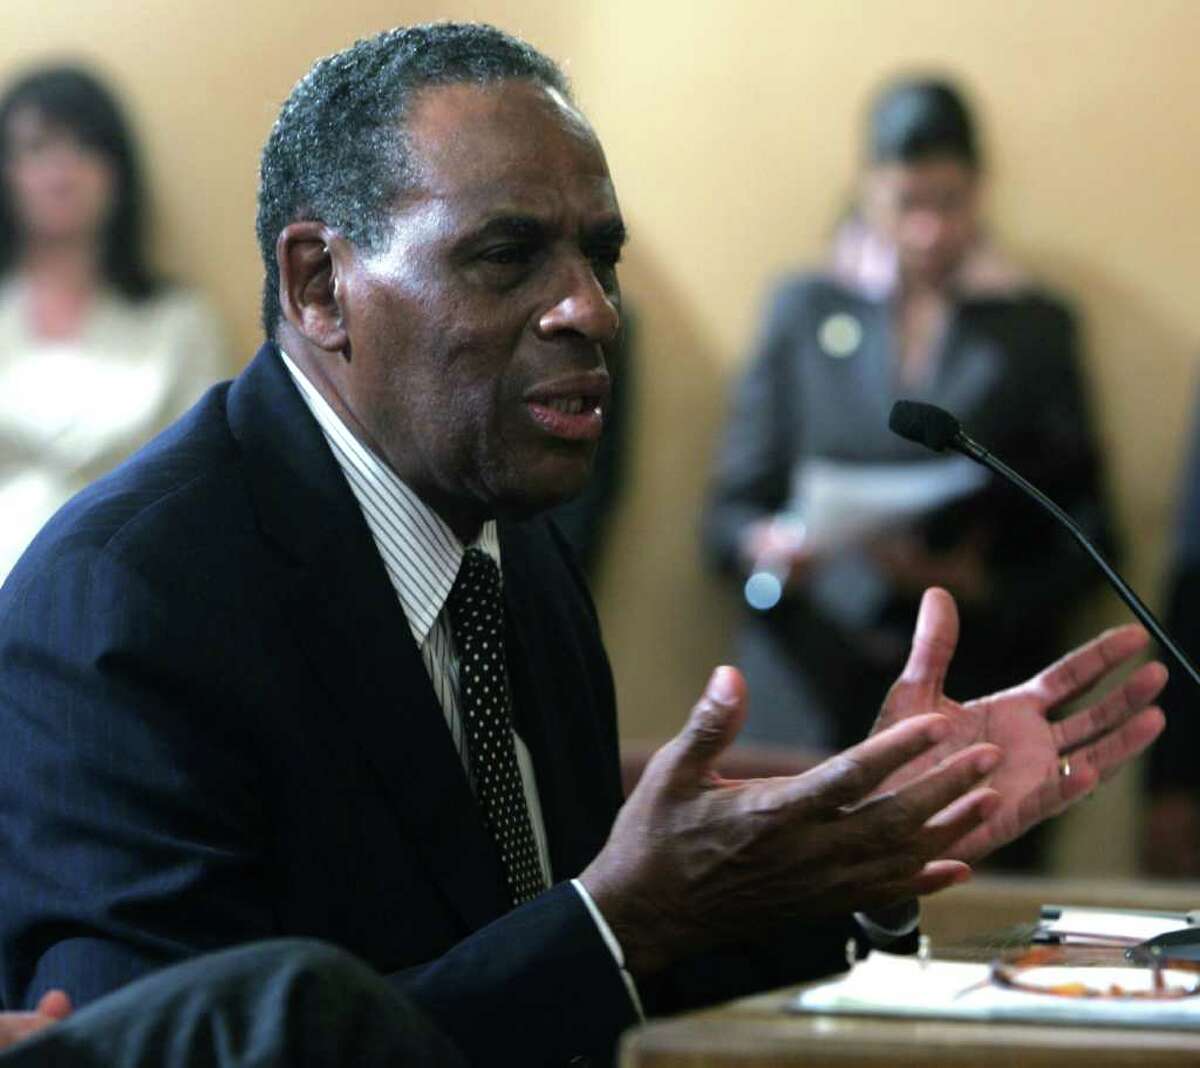 H. Carl McCall, a member of the board of trustees for the State University of New York, will succeed Carl Hayden as chair of the board. (Mike Groll / Associated Press)